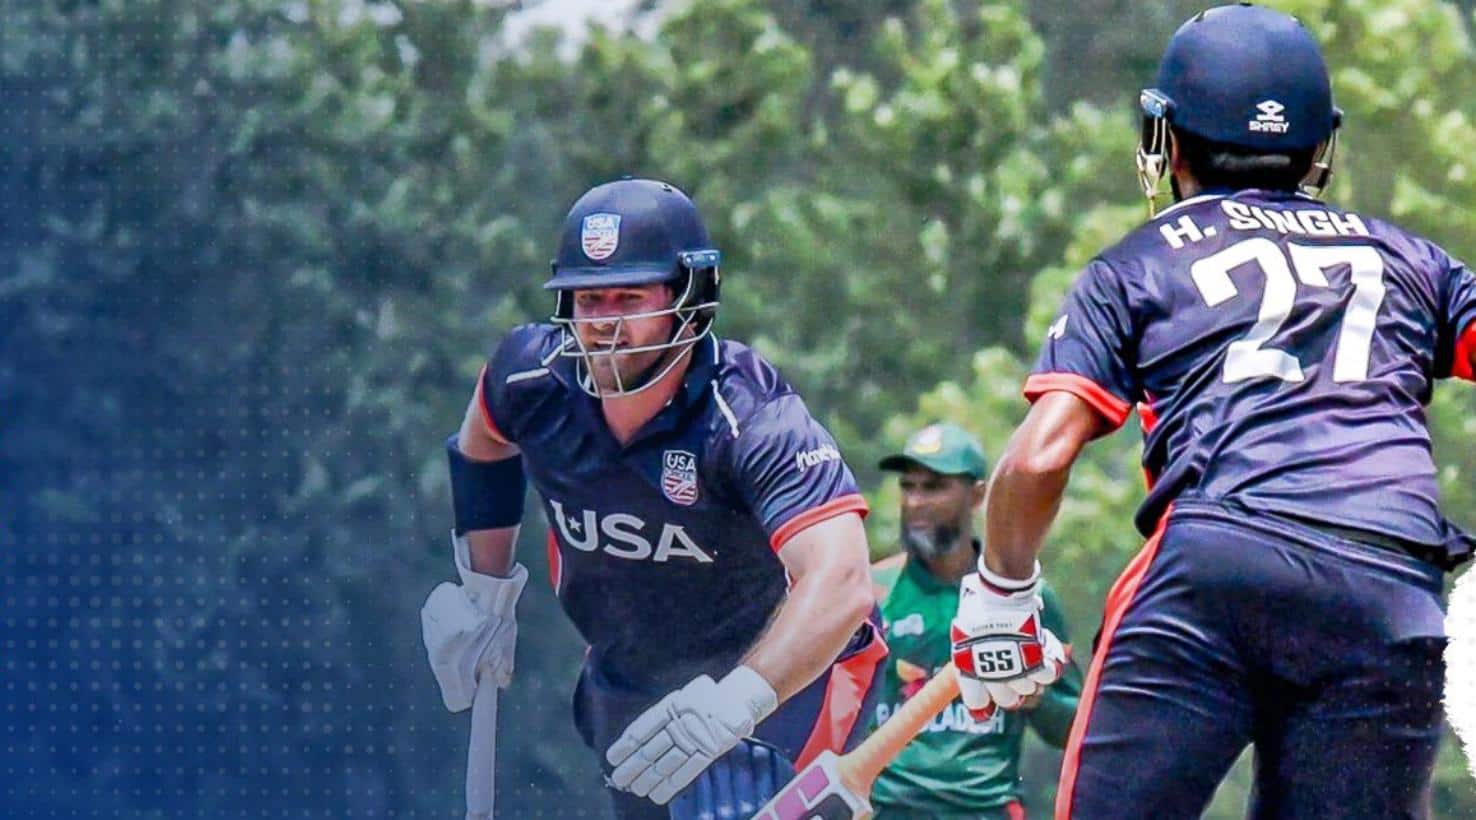 'Bangladesh Cricket, Please Hide': Twitter On Fire As USA Produces Upset Vs BAN In T20I